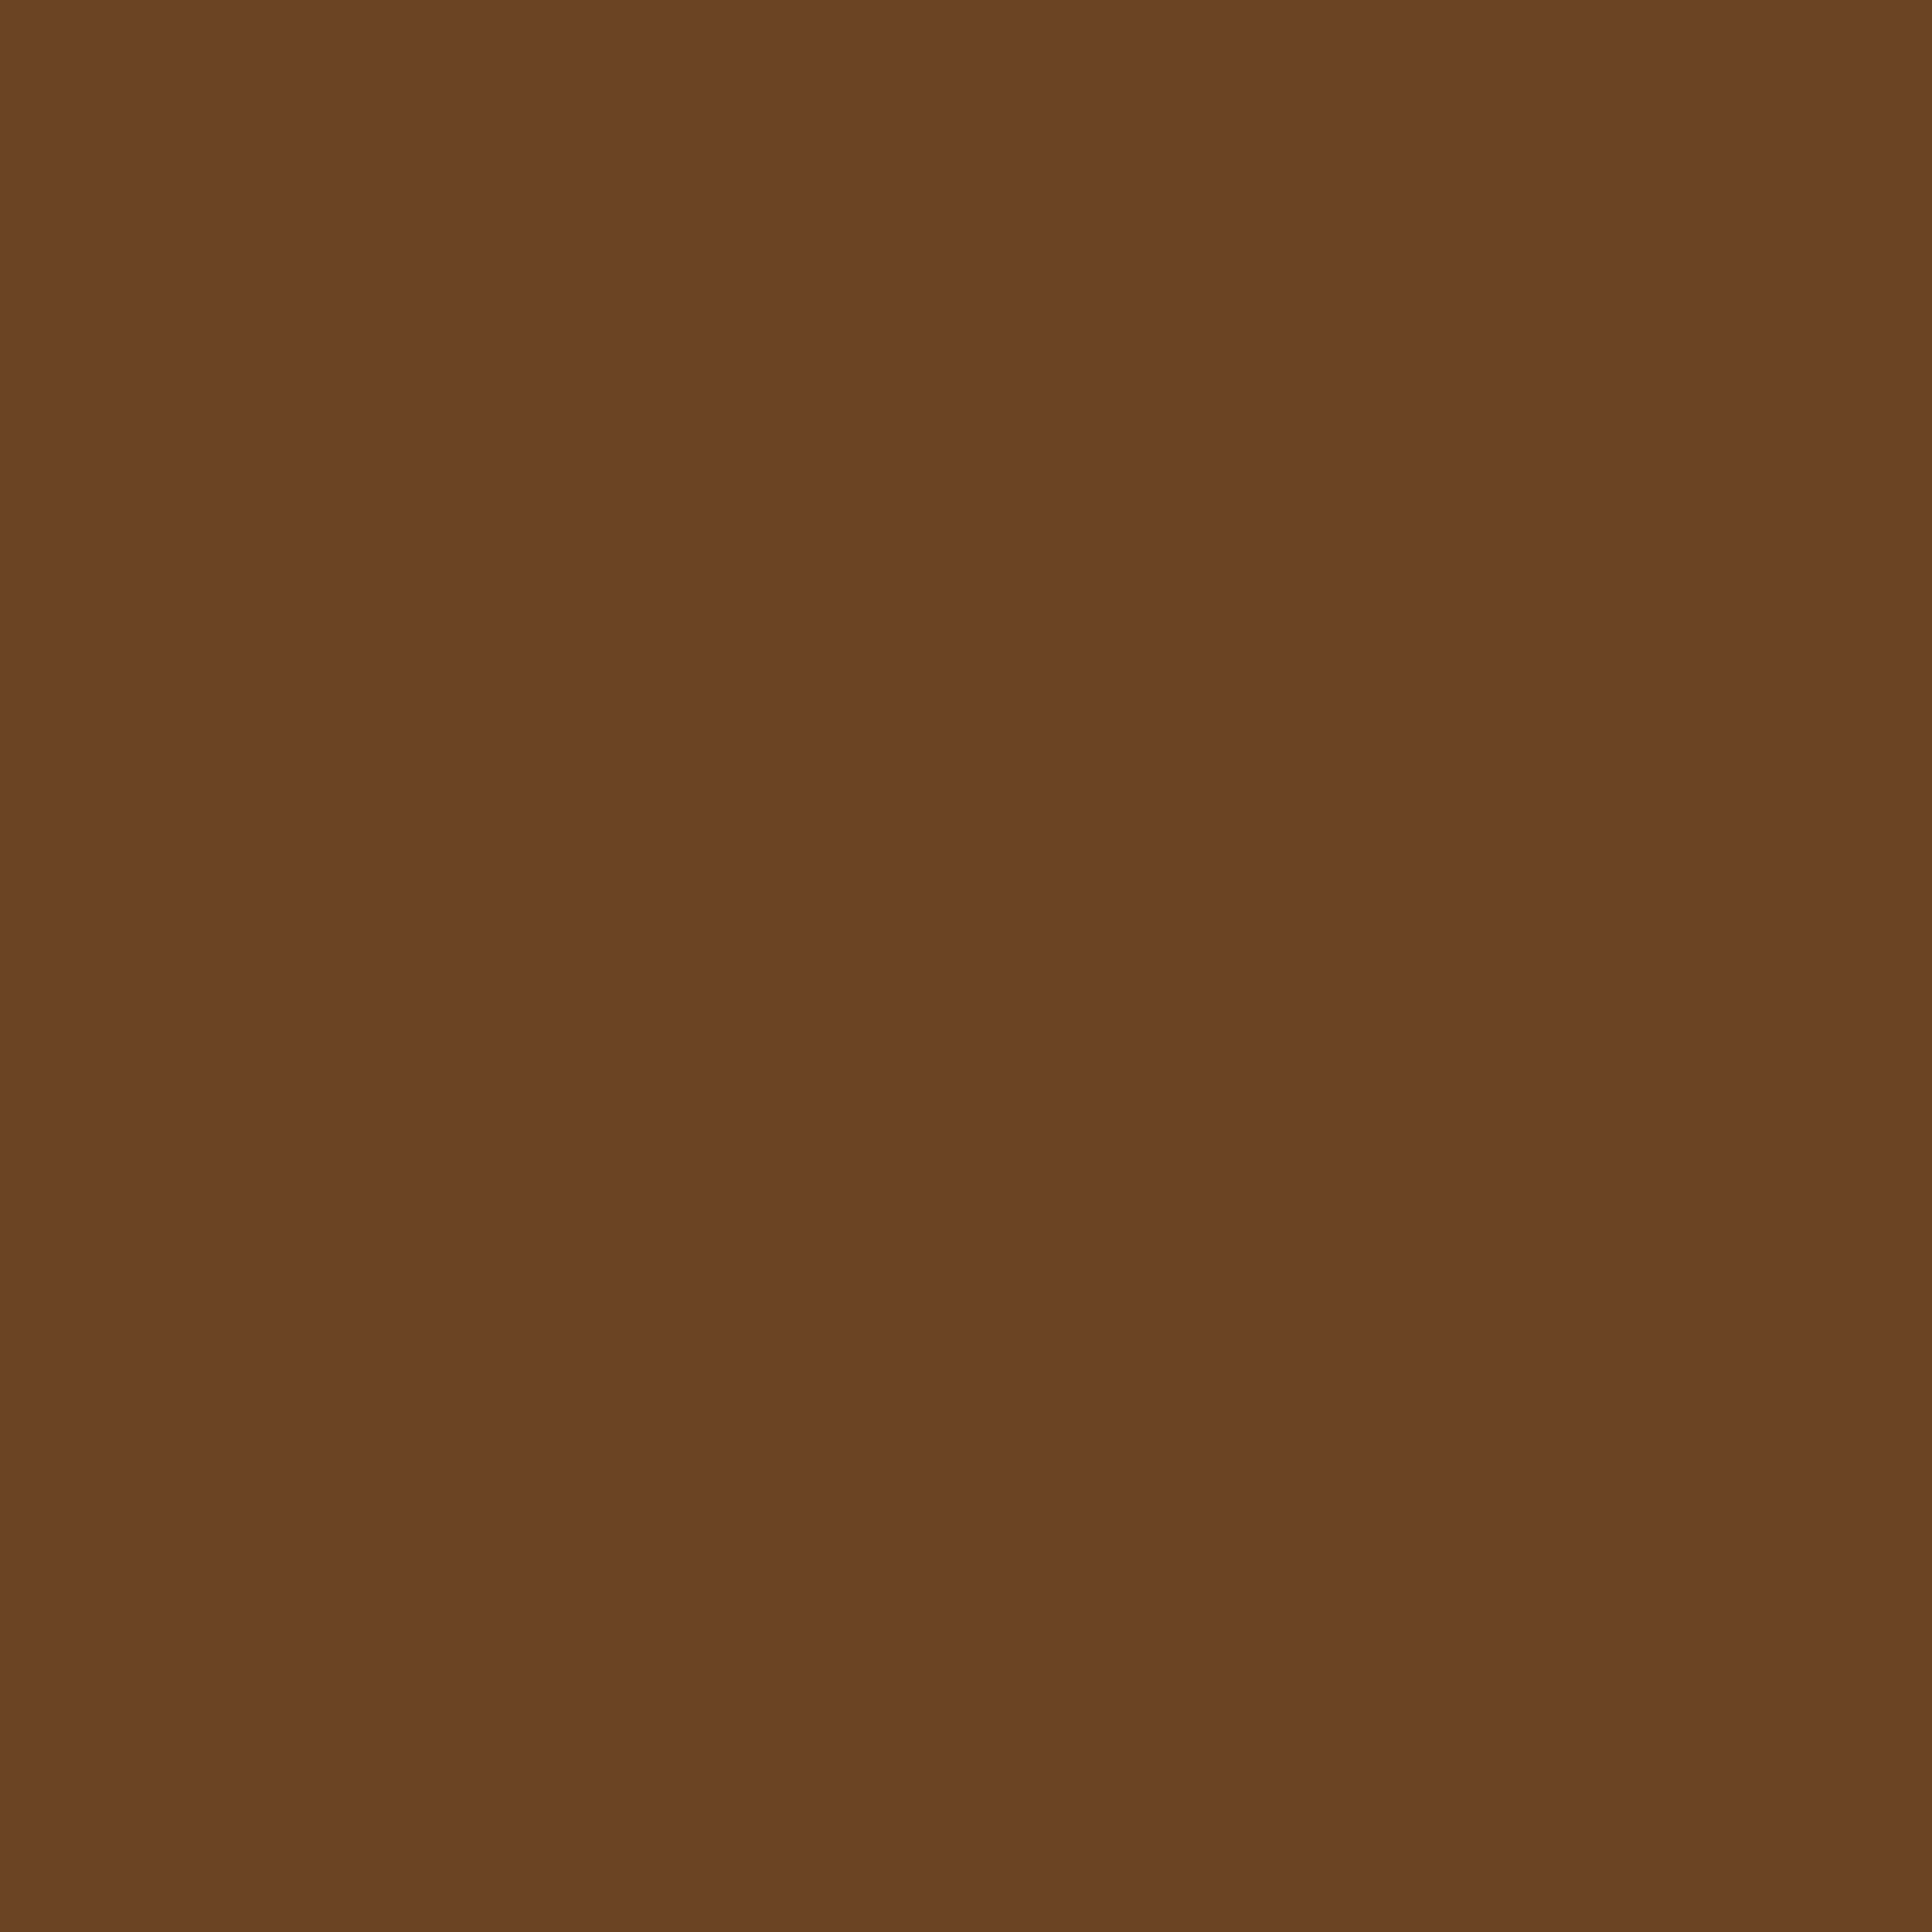 2732x2732 Brown-nose Solid Color Background